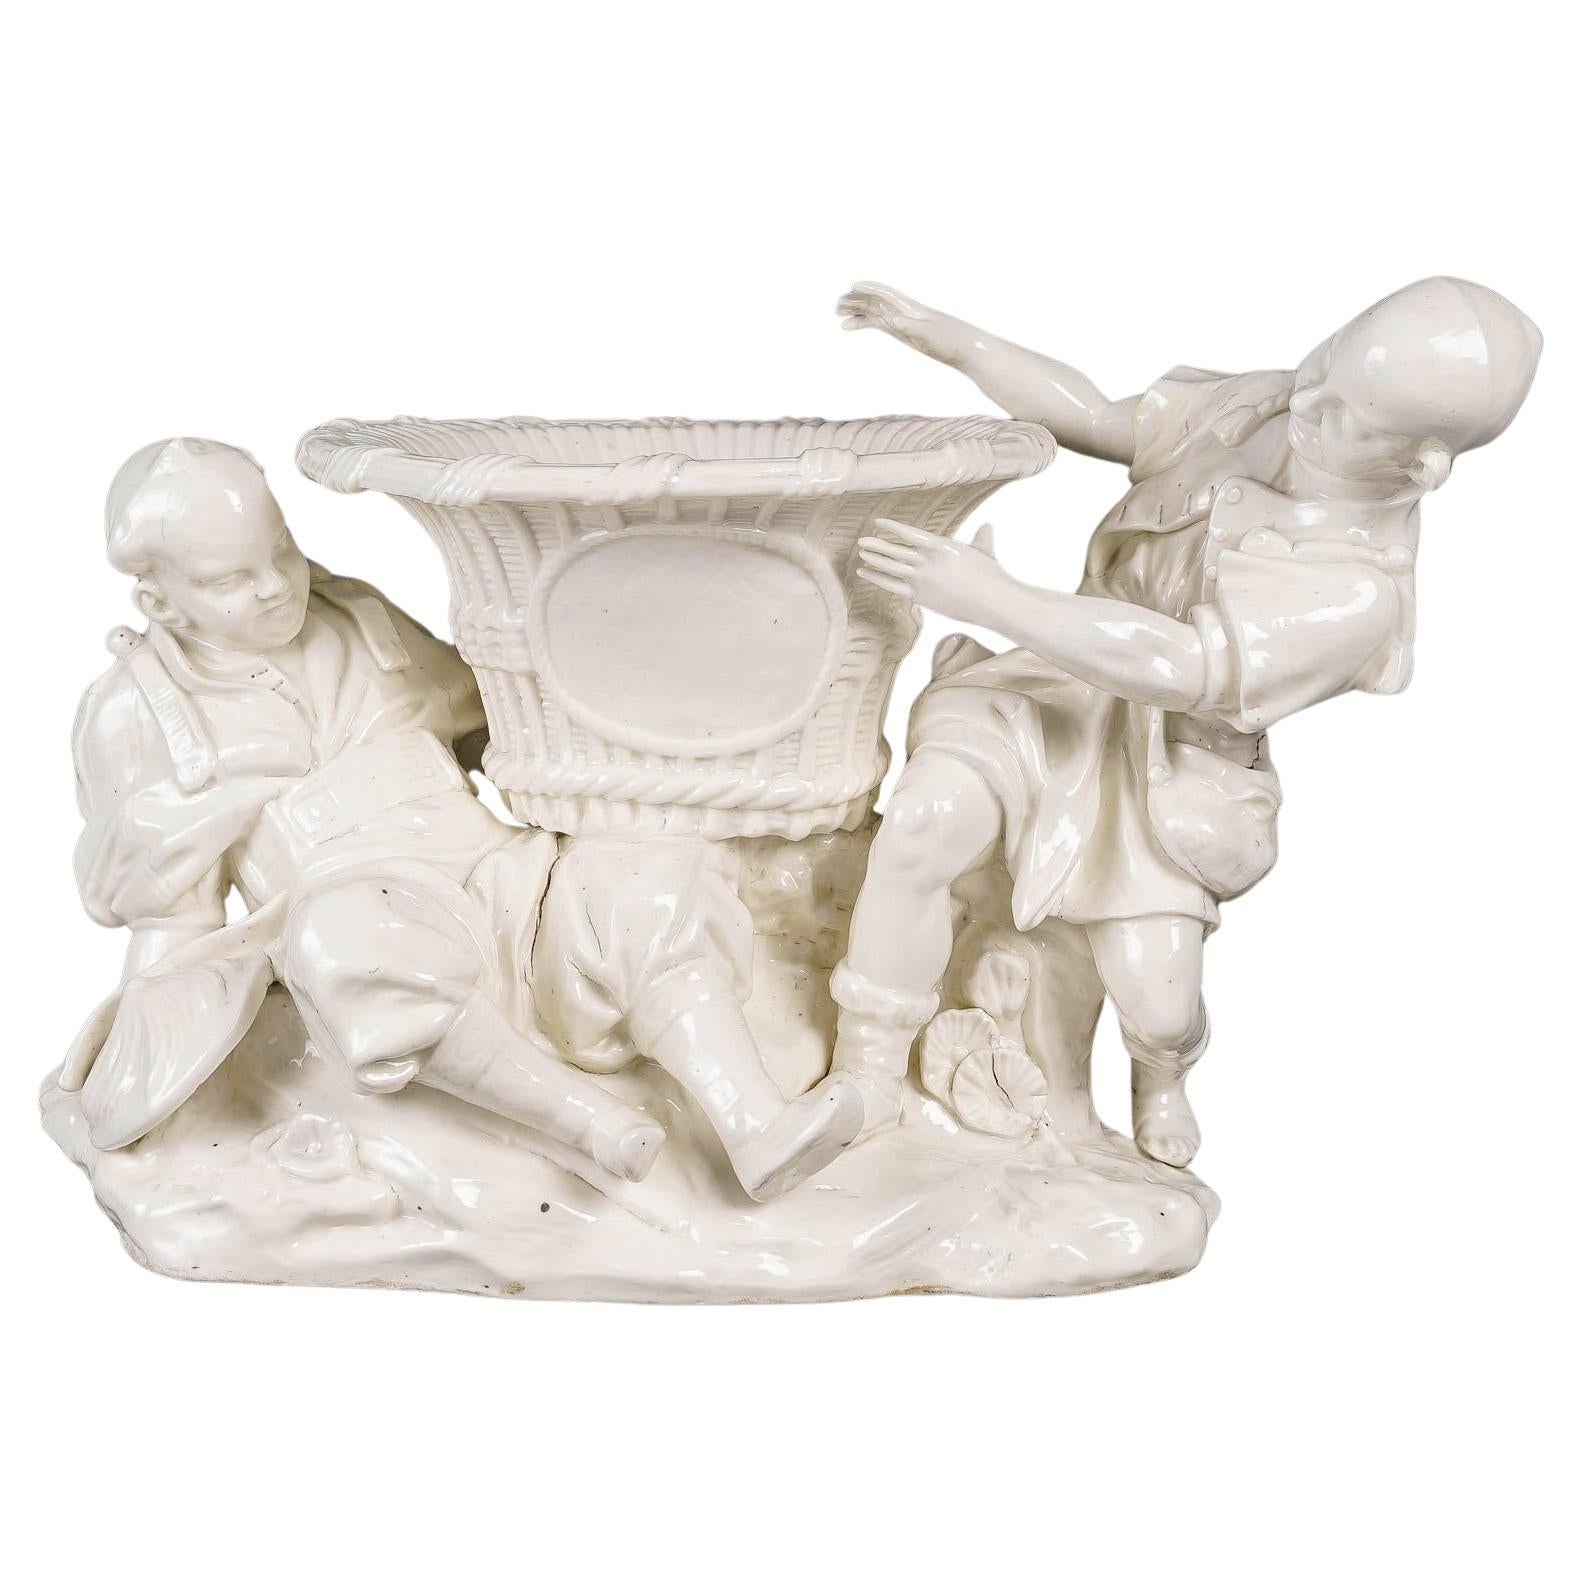 White Porcelain Jardinière, Chinese Style, Early 20th Century.